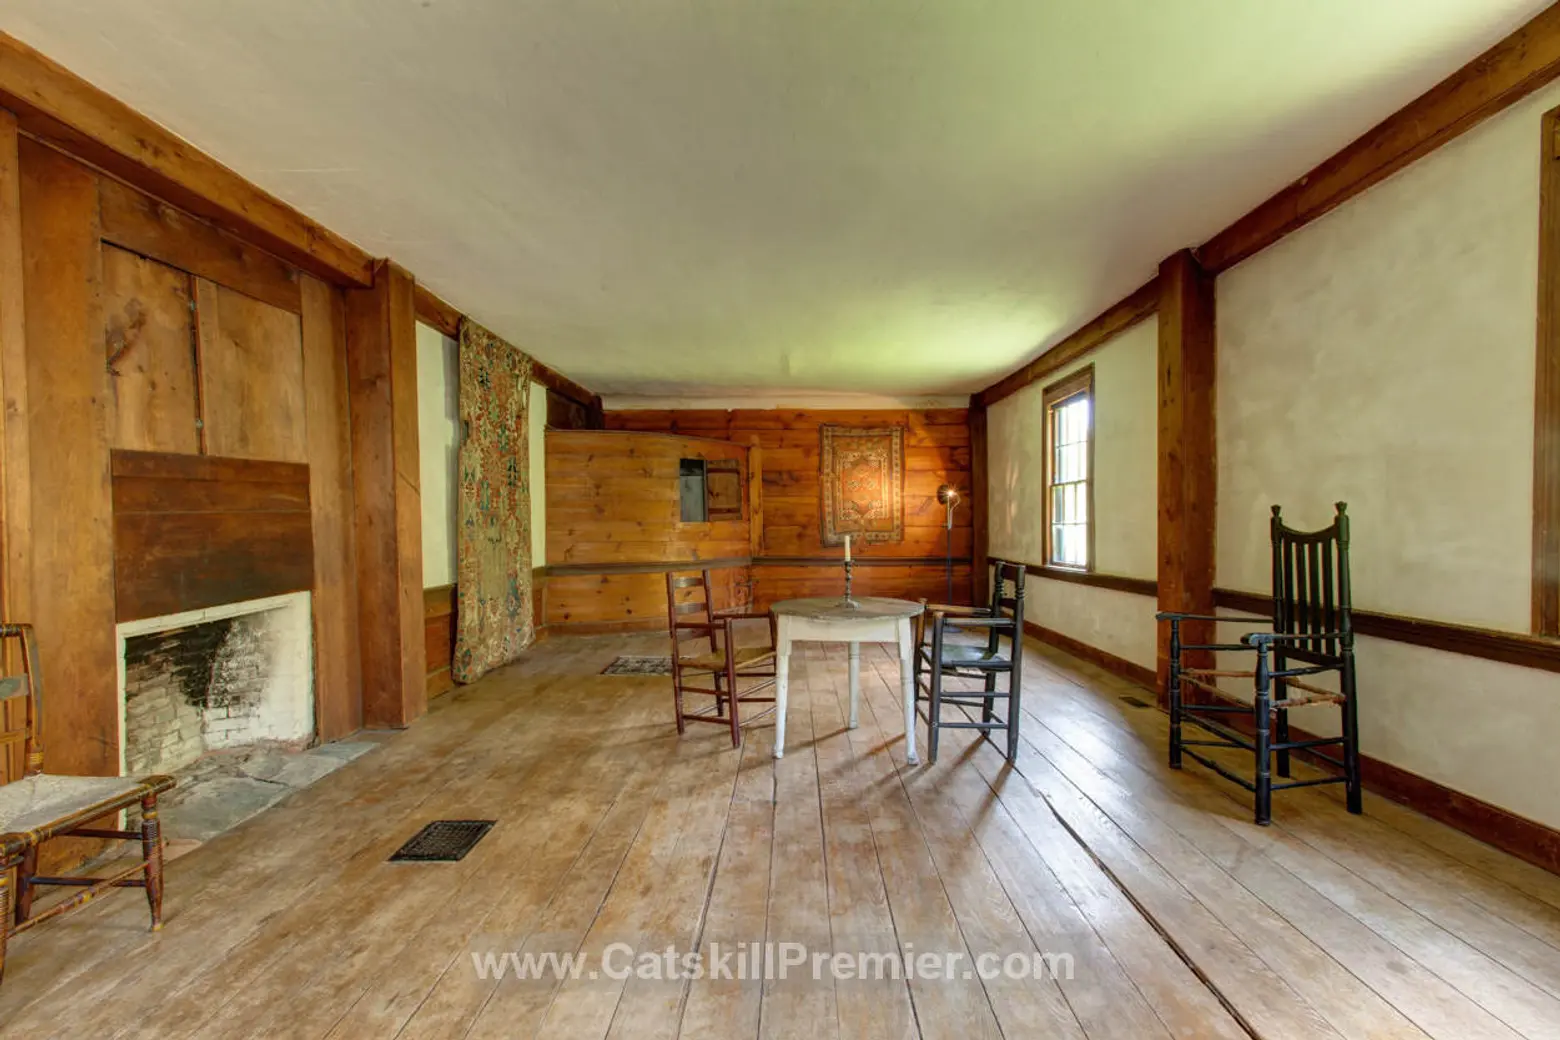 Catskills Colonial, 5663 County Highway 2, Andes NY, underground railroad safe house